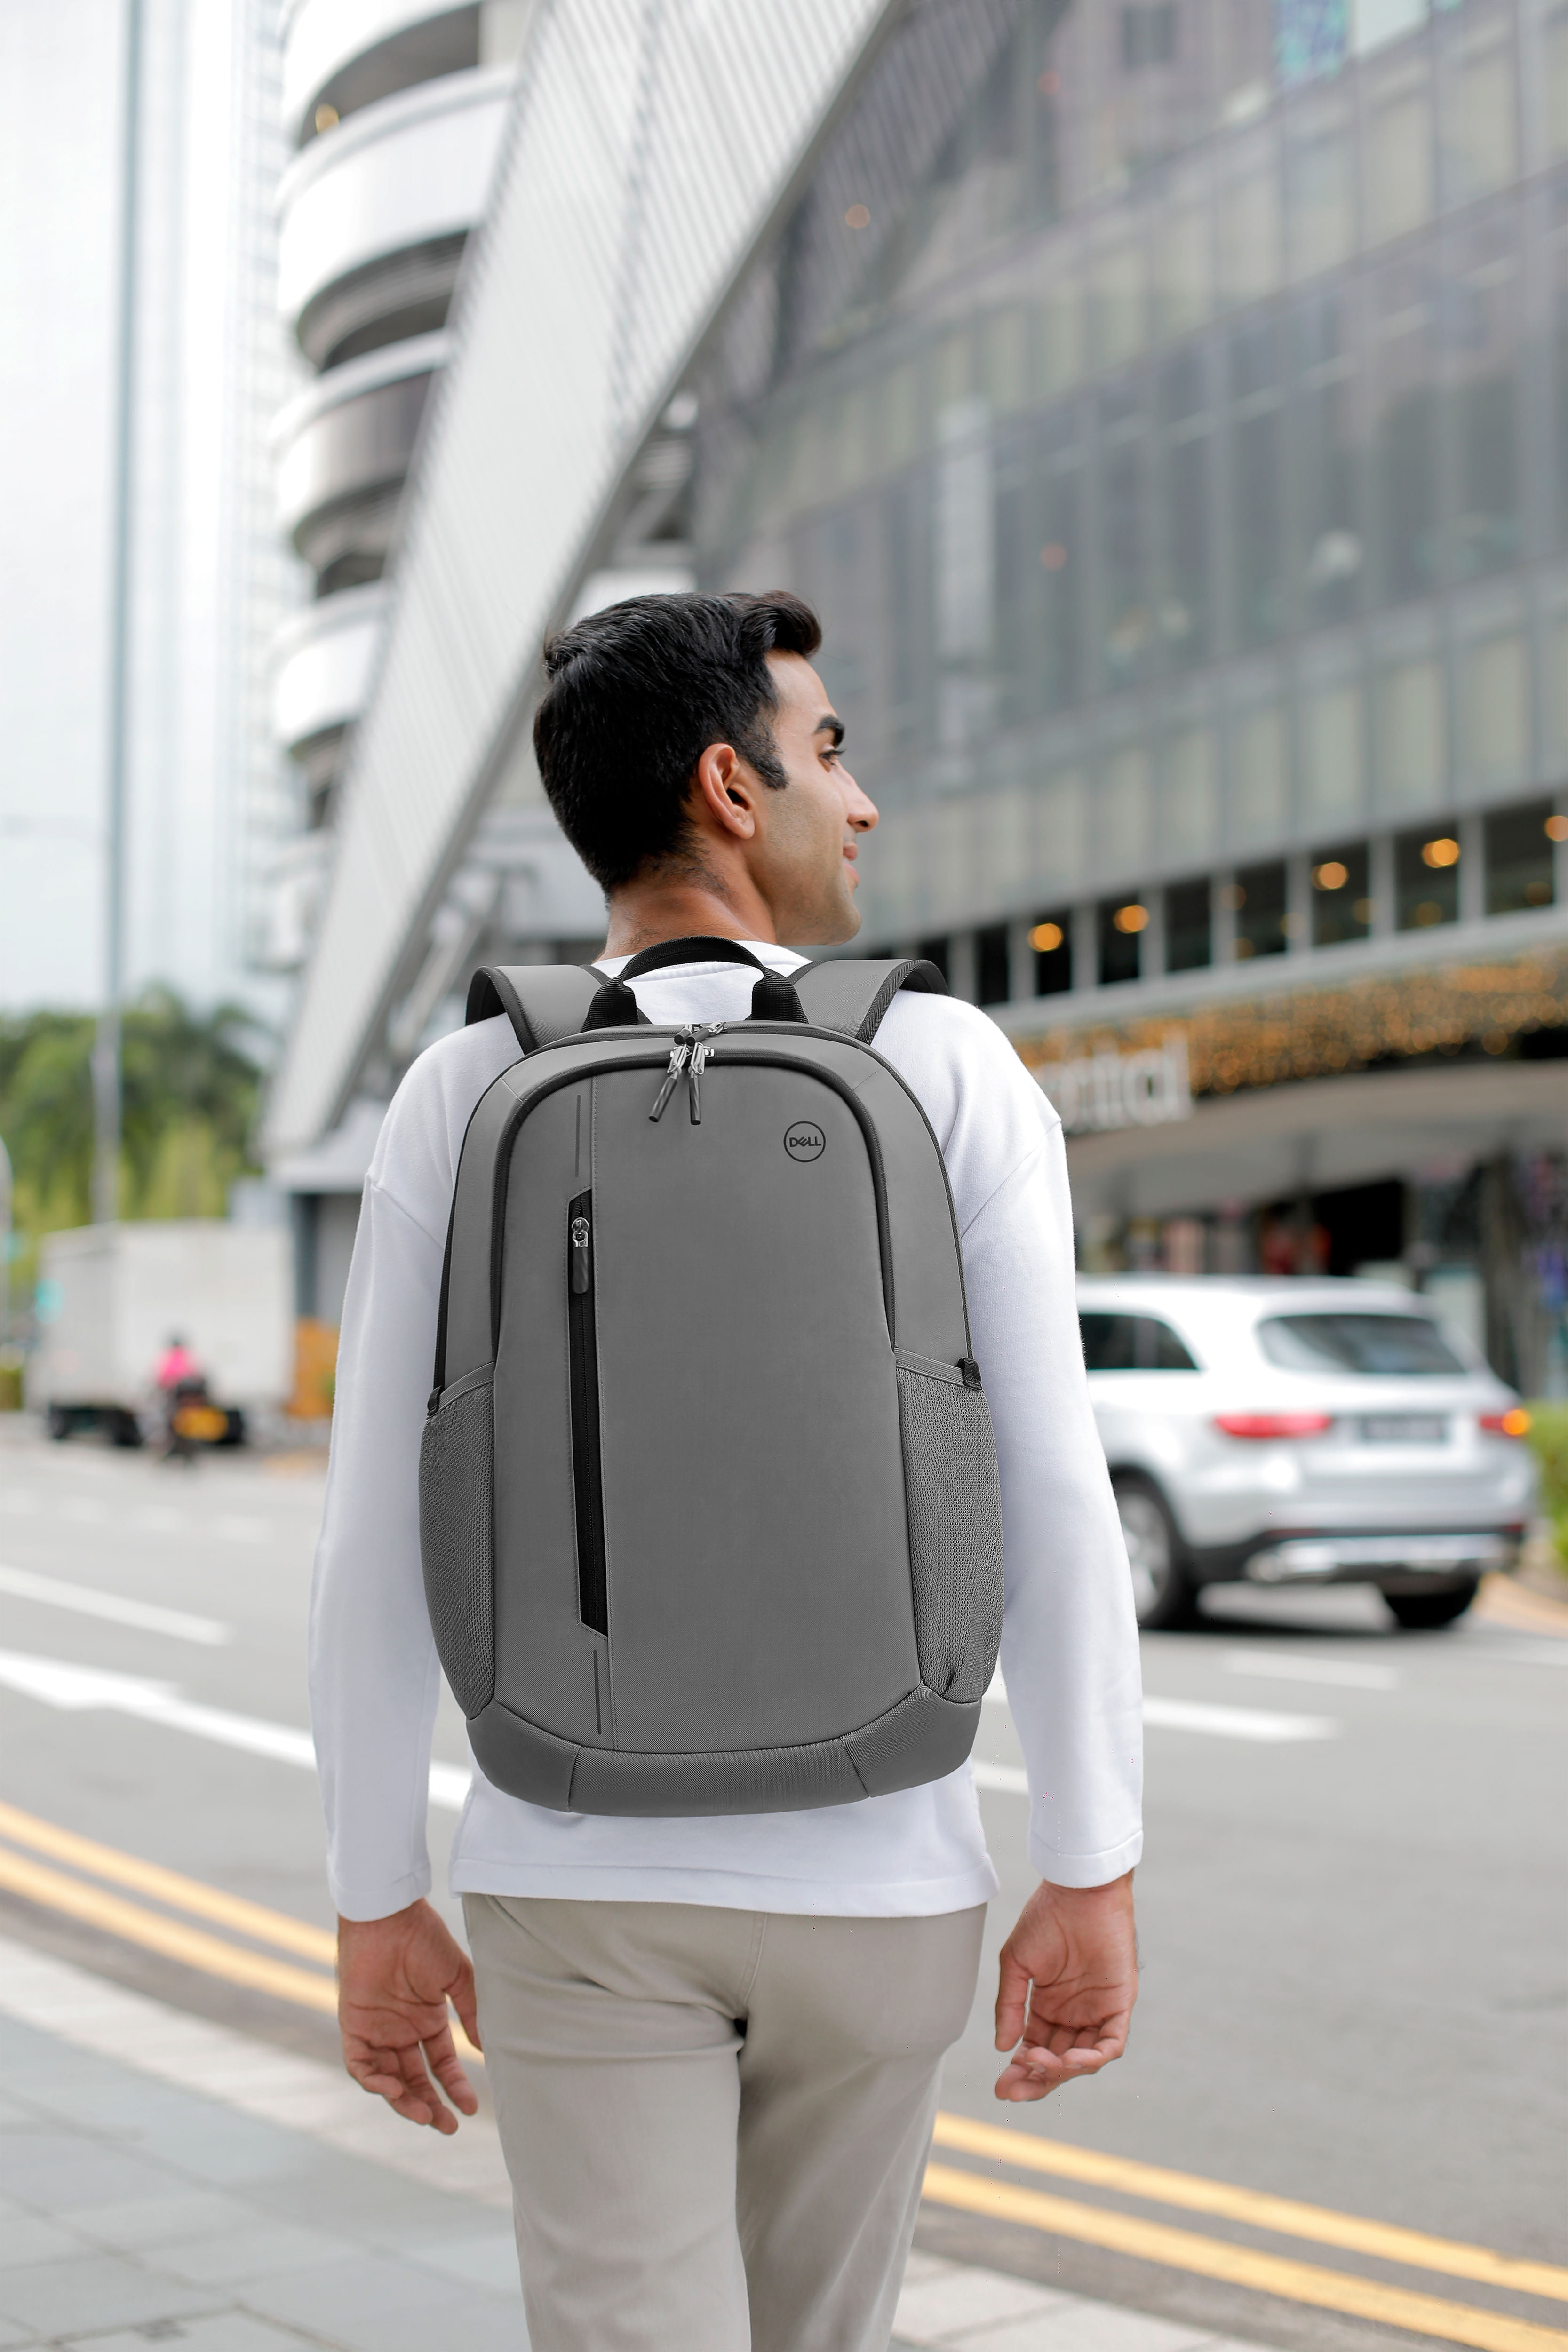 Dell EcoLoop Urban Backpack Up To 15